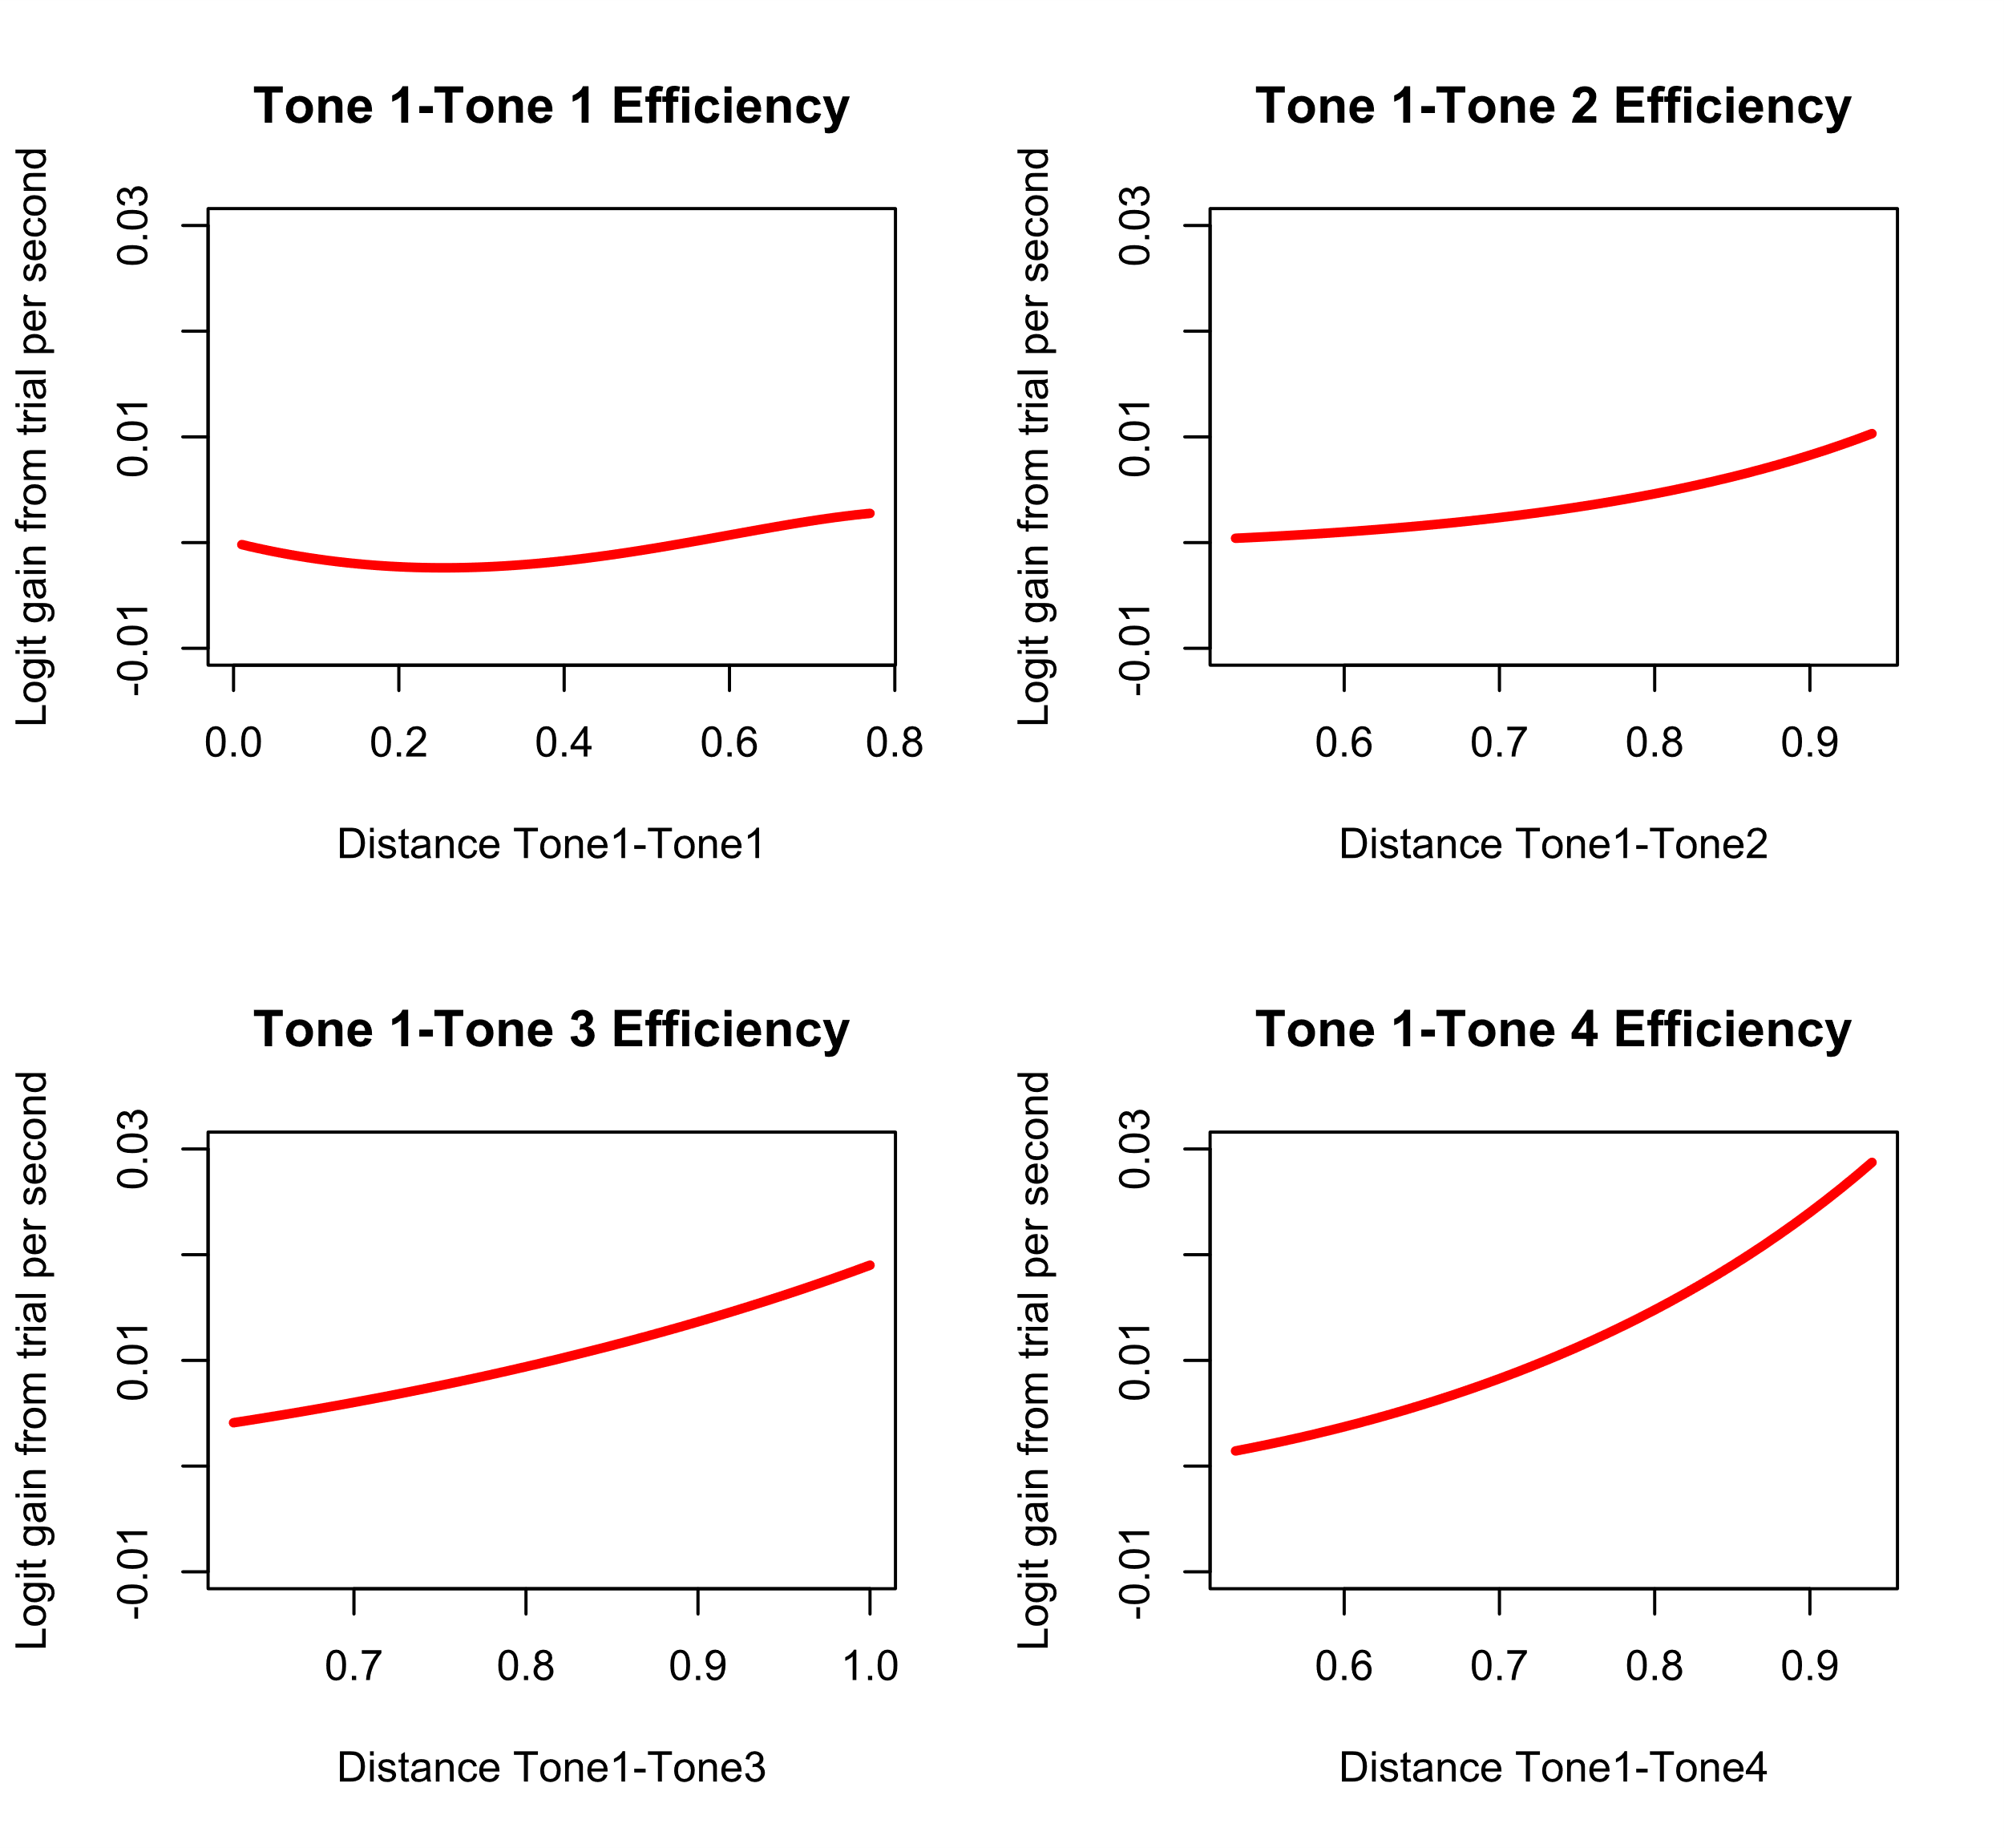 The learning efficiency curves given Tone 1 as the previous trial.